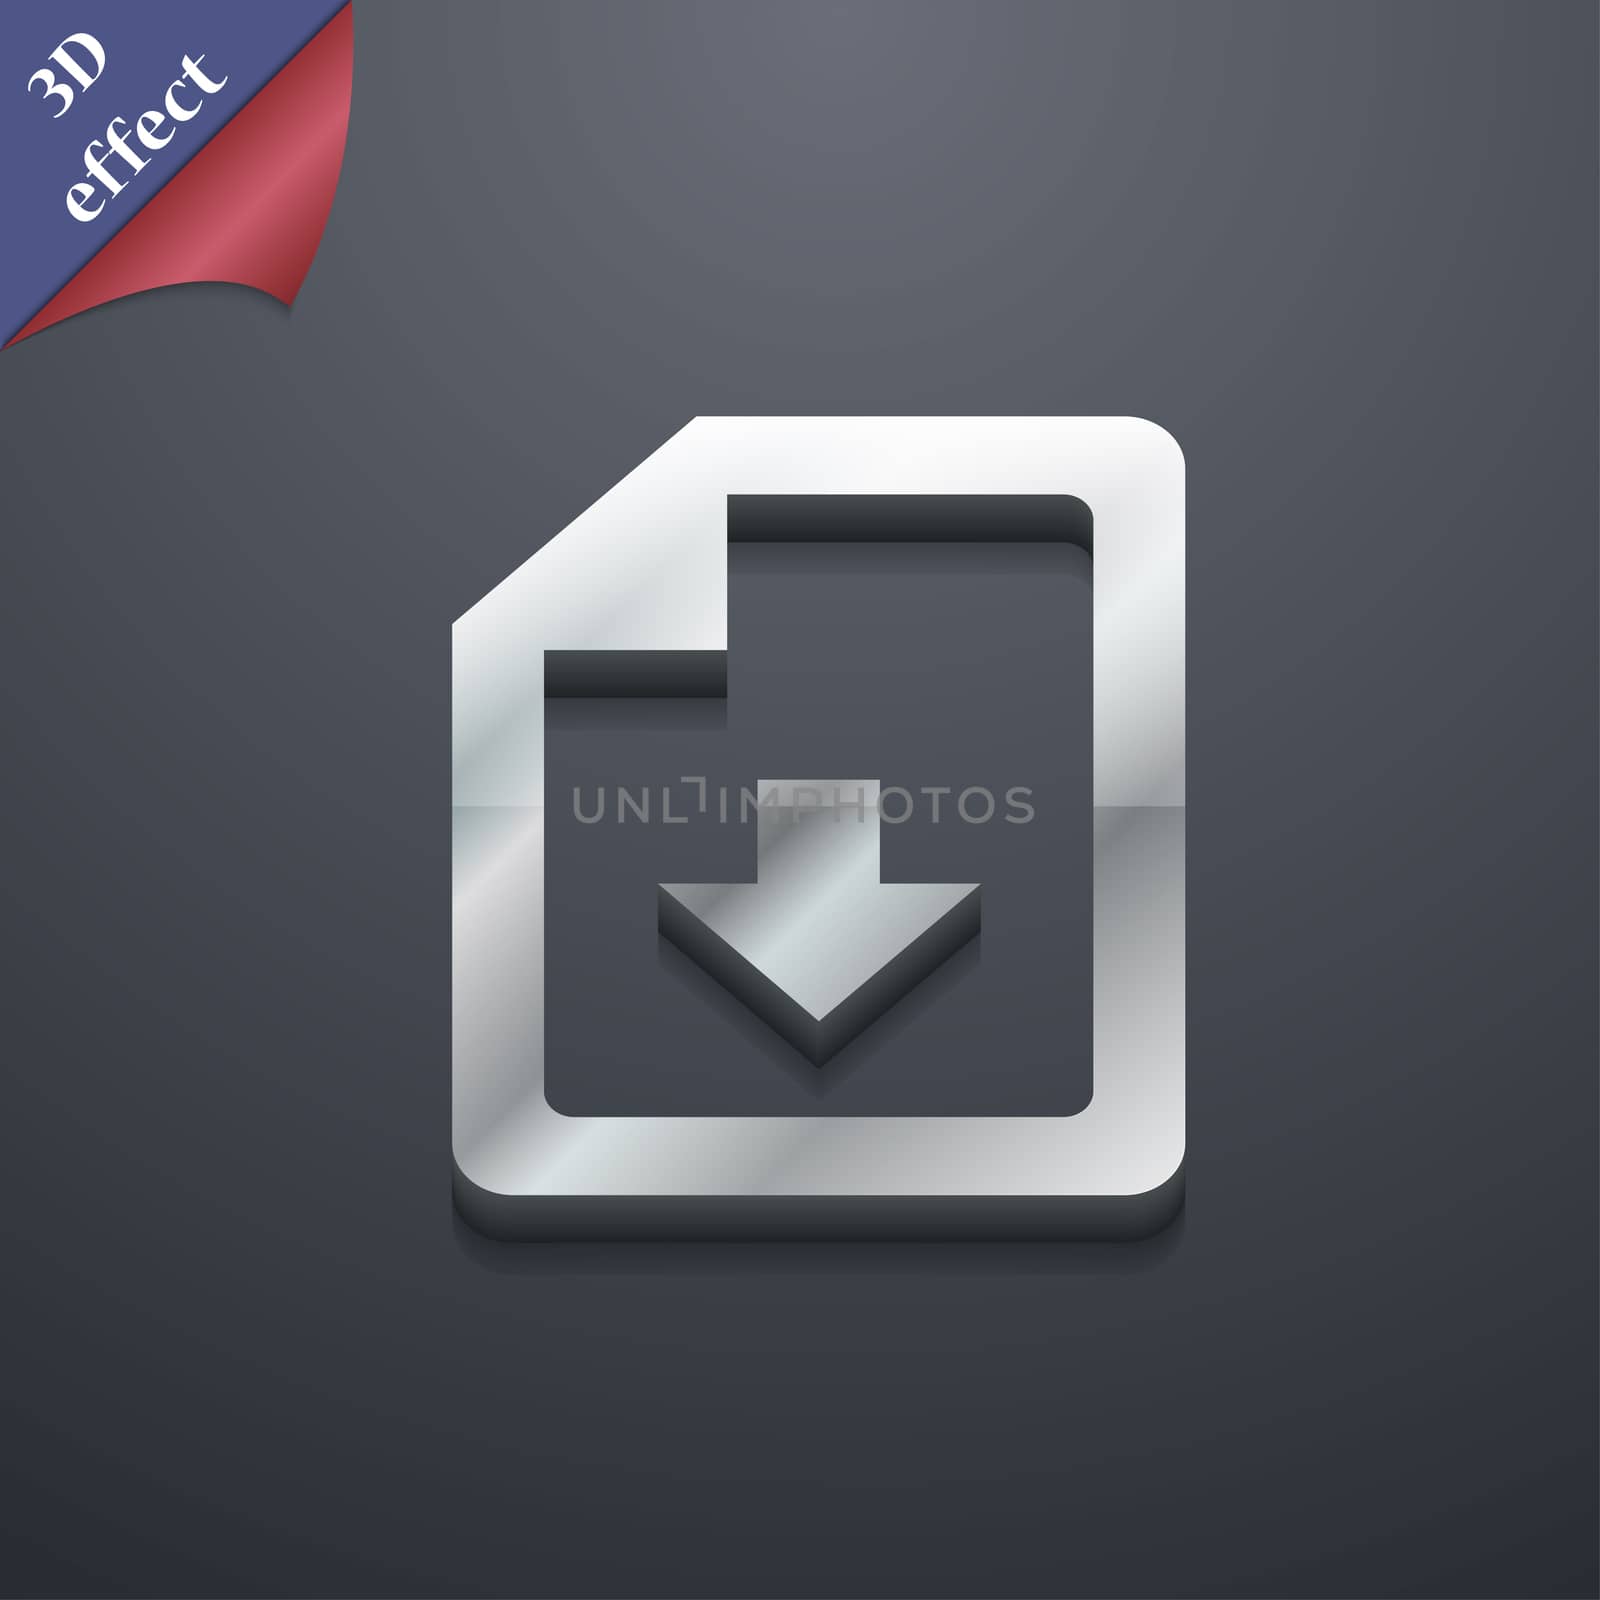 import, download file icon symbol. 3D style. Trendy, modern design with space for your text . Rastrized by serhii_lohvyniuk